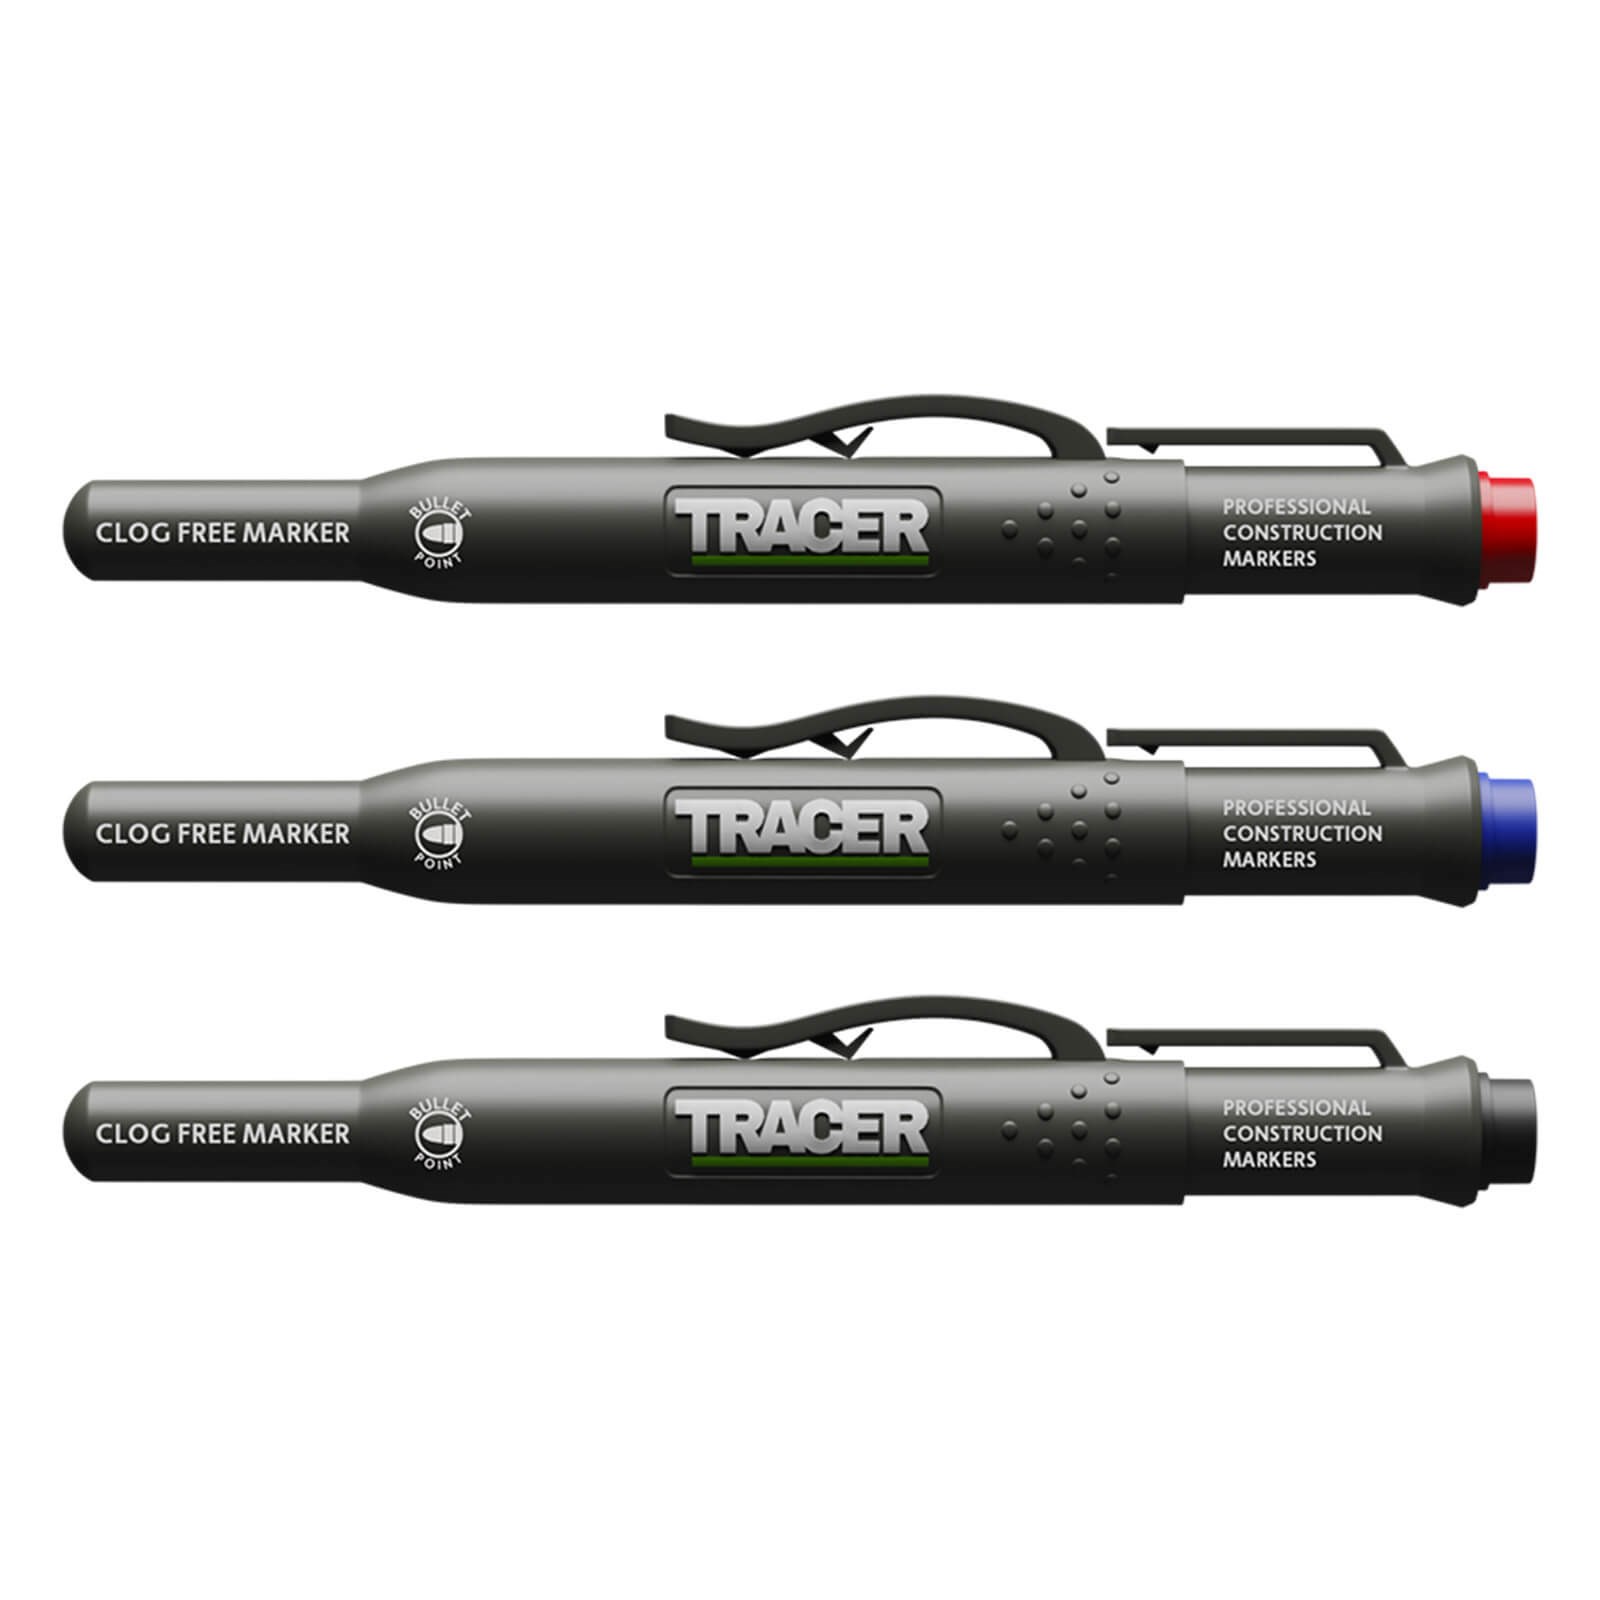 Tracer Professional Clog Free Deep Hole Marker